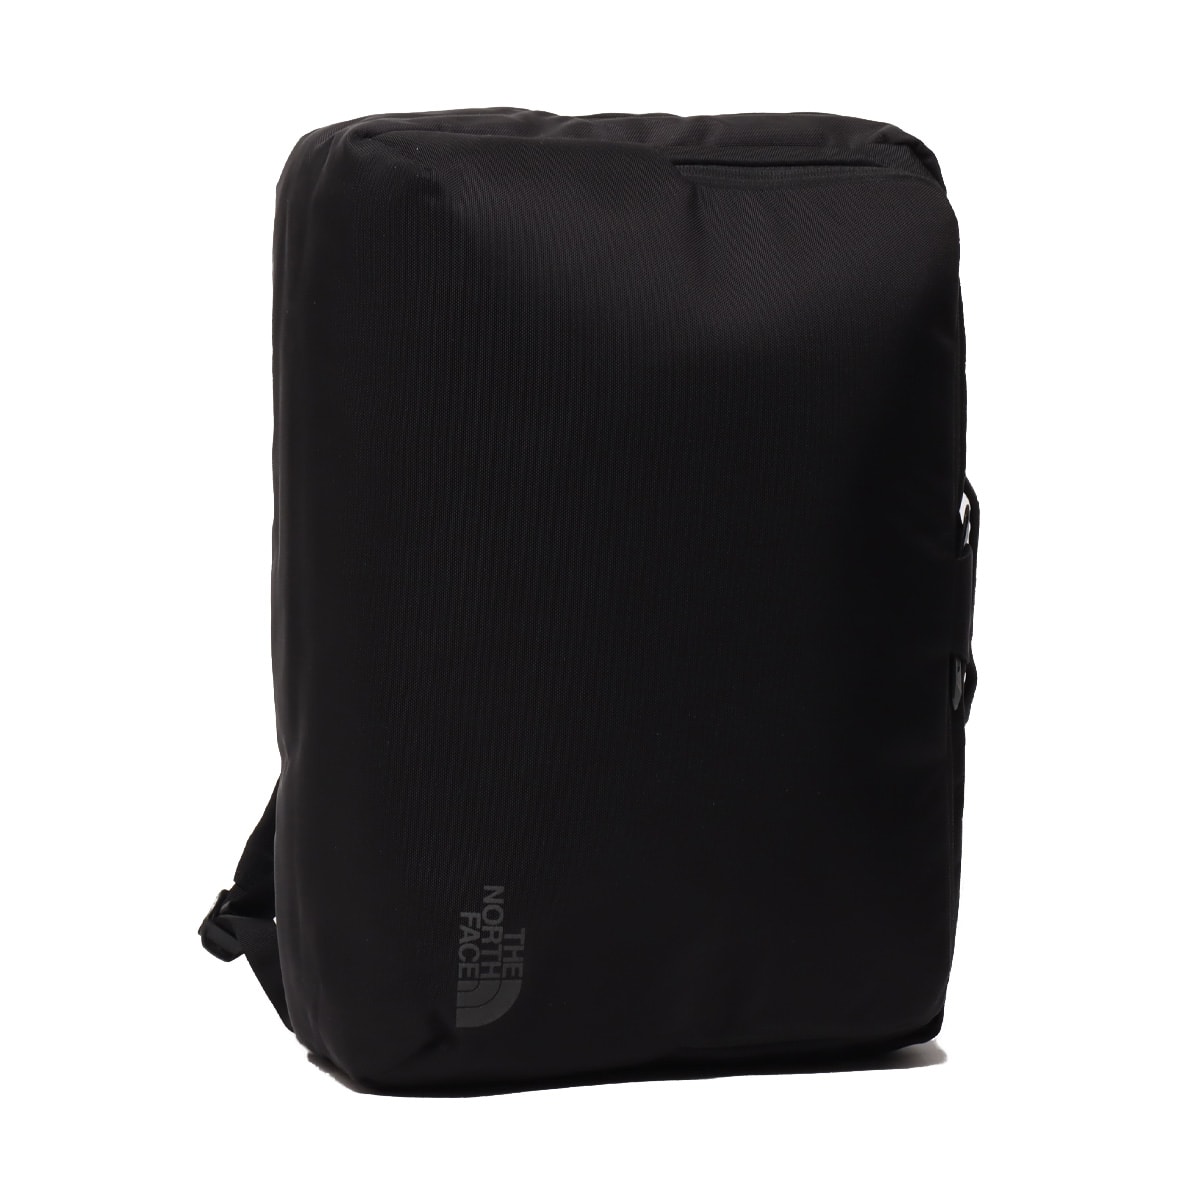 THE NORTH FACE SHUTTLE 3WAY DAYPACK BLACK 21FW-I